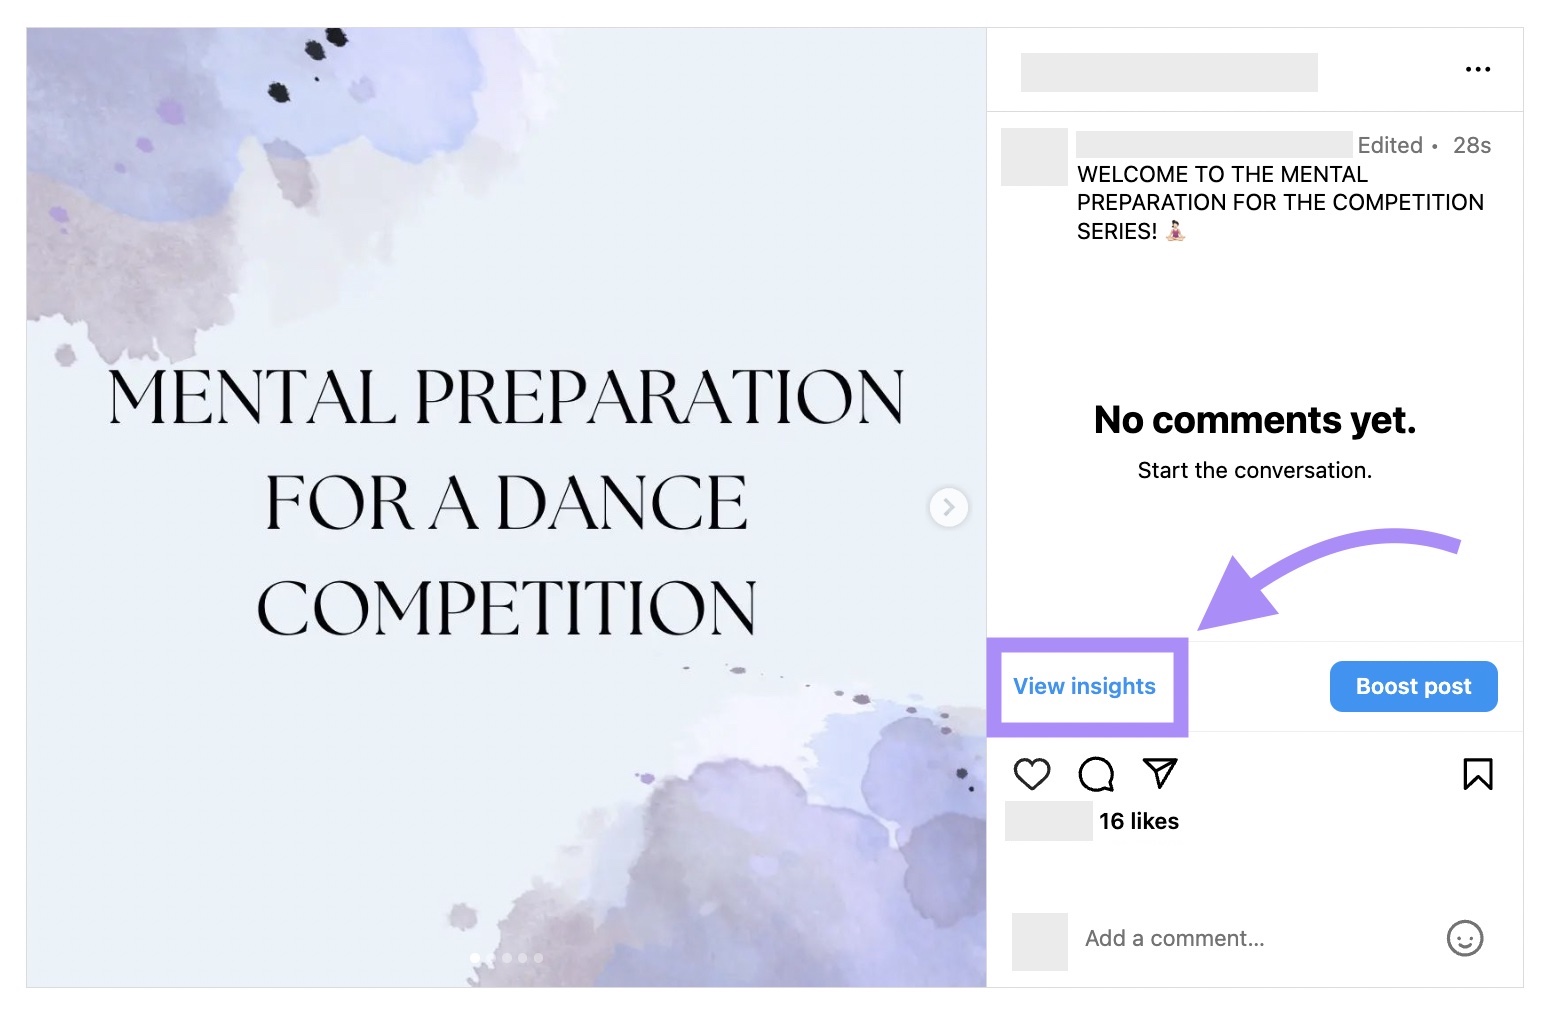 “View Insights” button highlighted on the right the post caption and comments